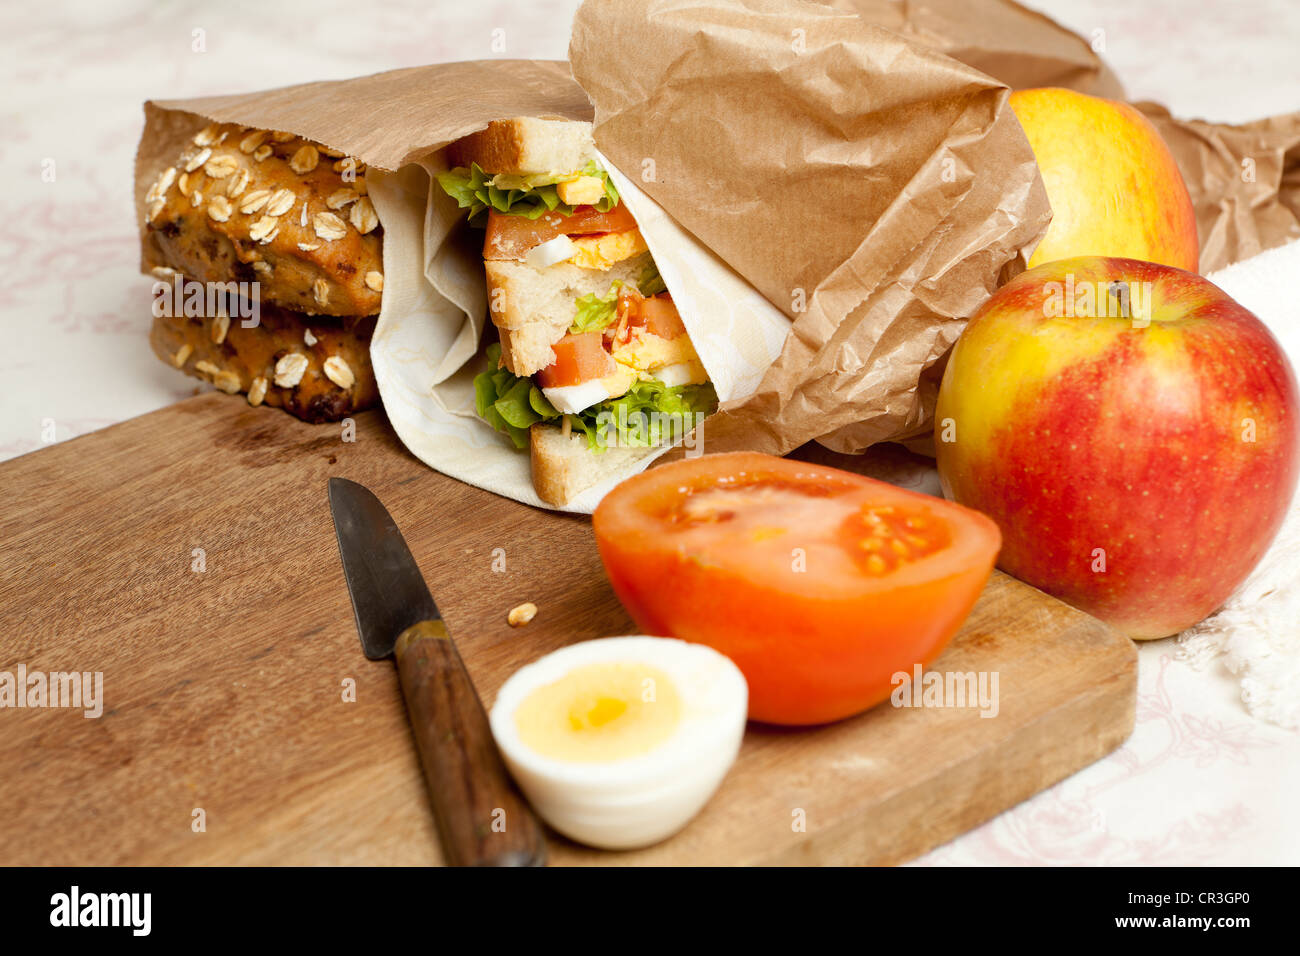 Fruit, sandwiches and buns in a brown paper lunch bag Stock Photo